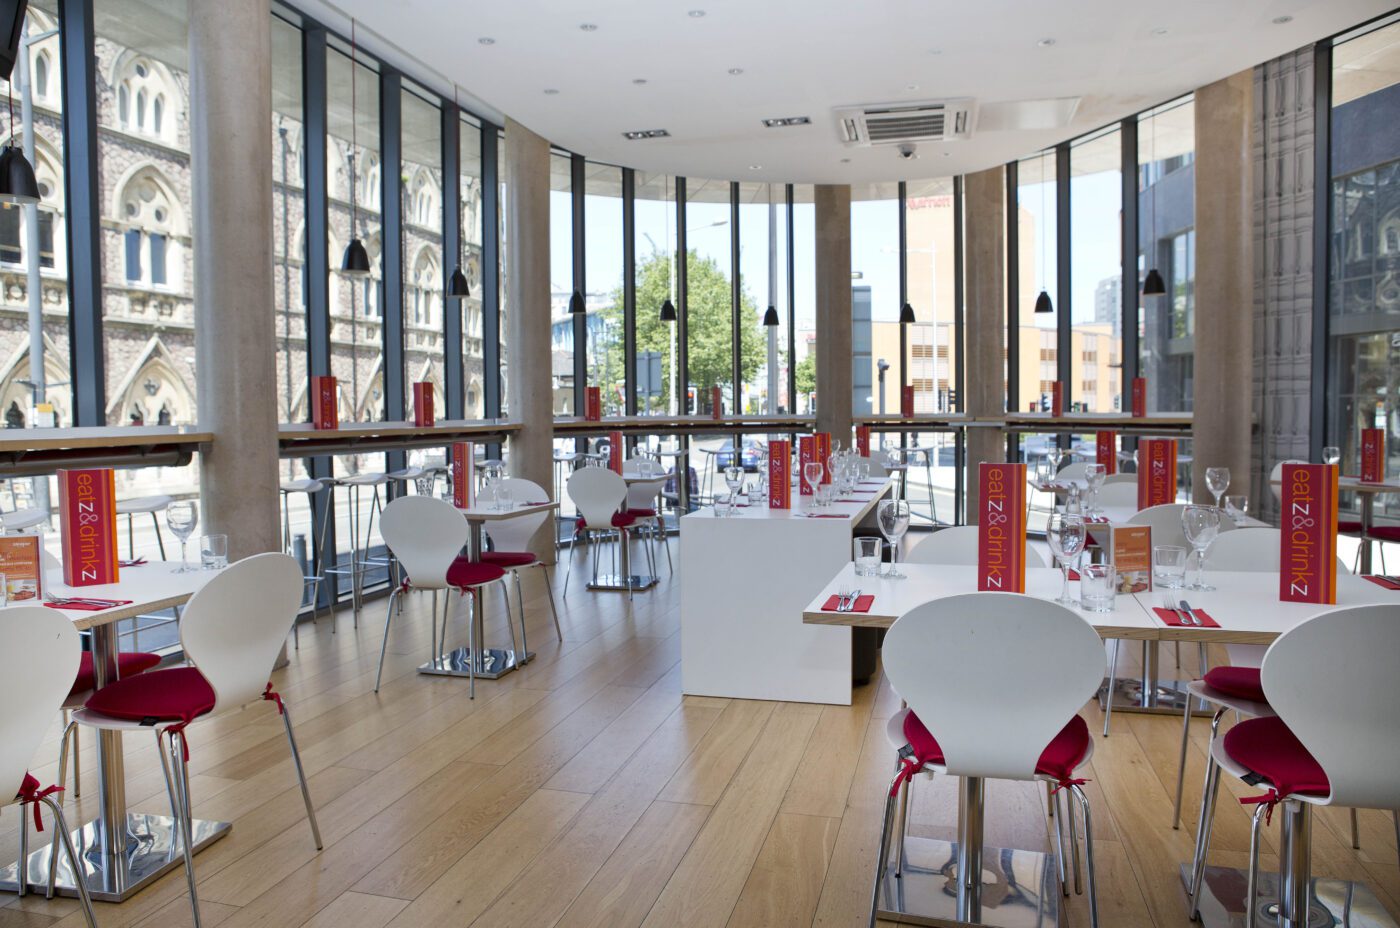 Sleeperz dining hall with built-in tables facing glass windows.